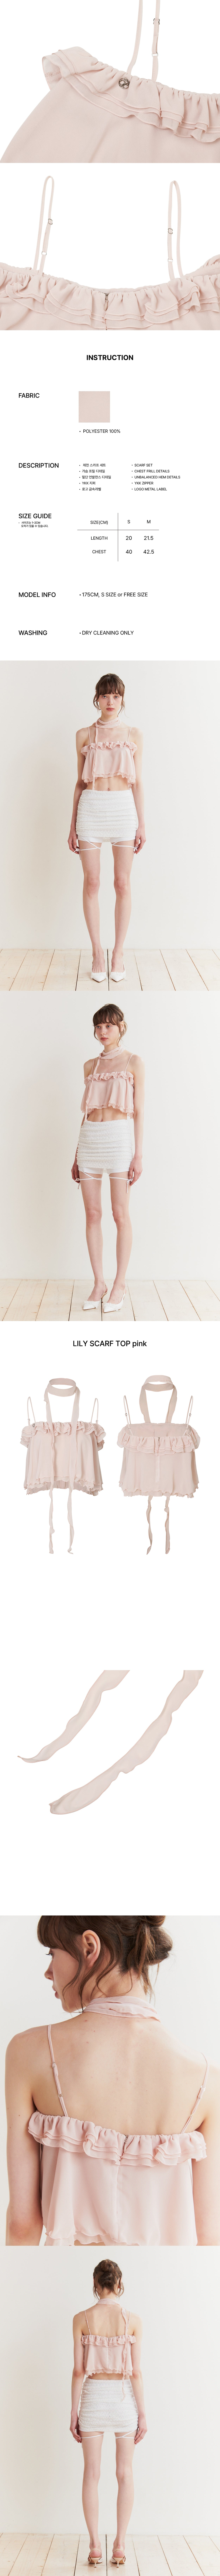 LILY SCARF TOP pink